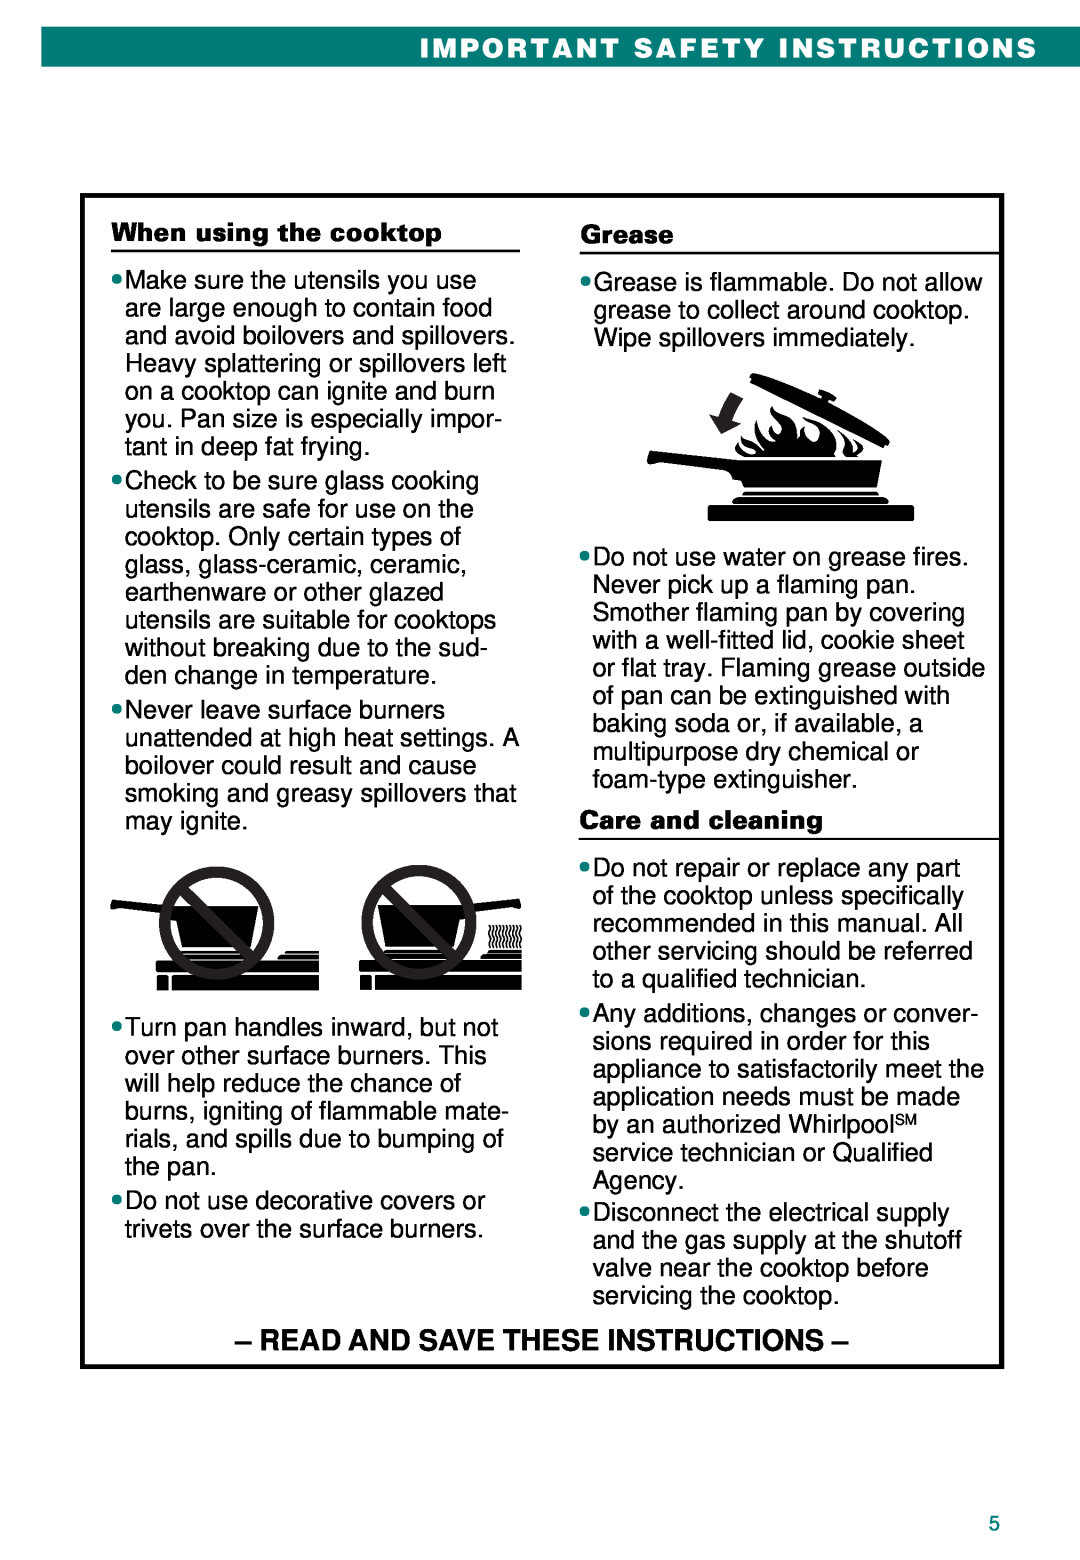 Whirlpool SC8100XA Read And Save These Instructions, Important Safety Instructions, When using the cooktop, Grease 